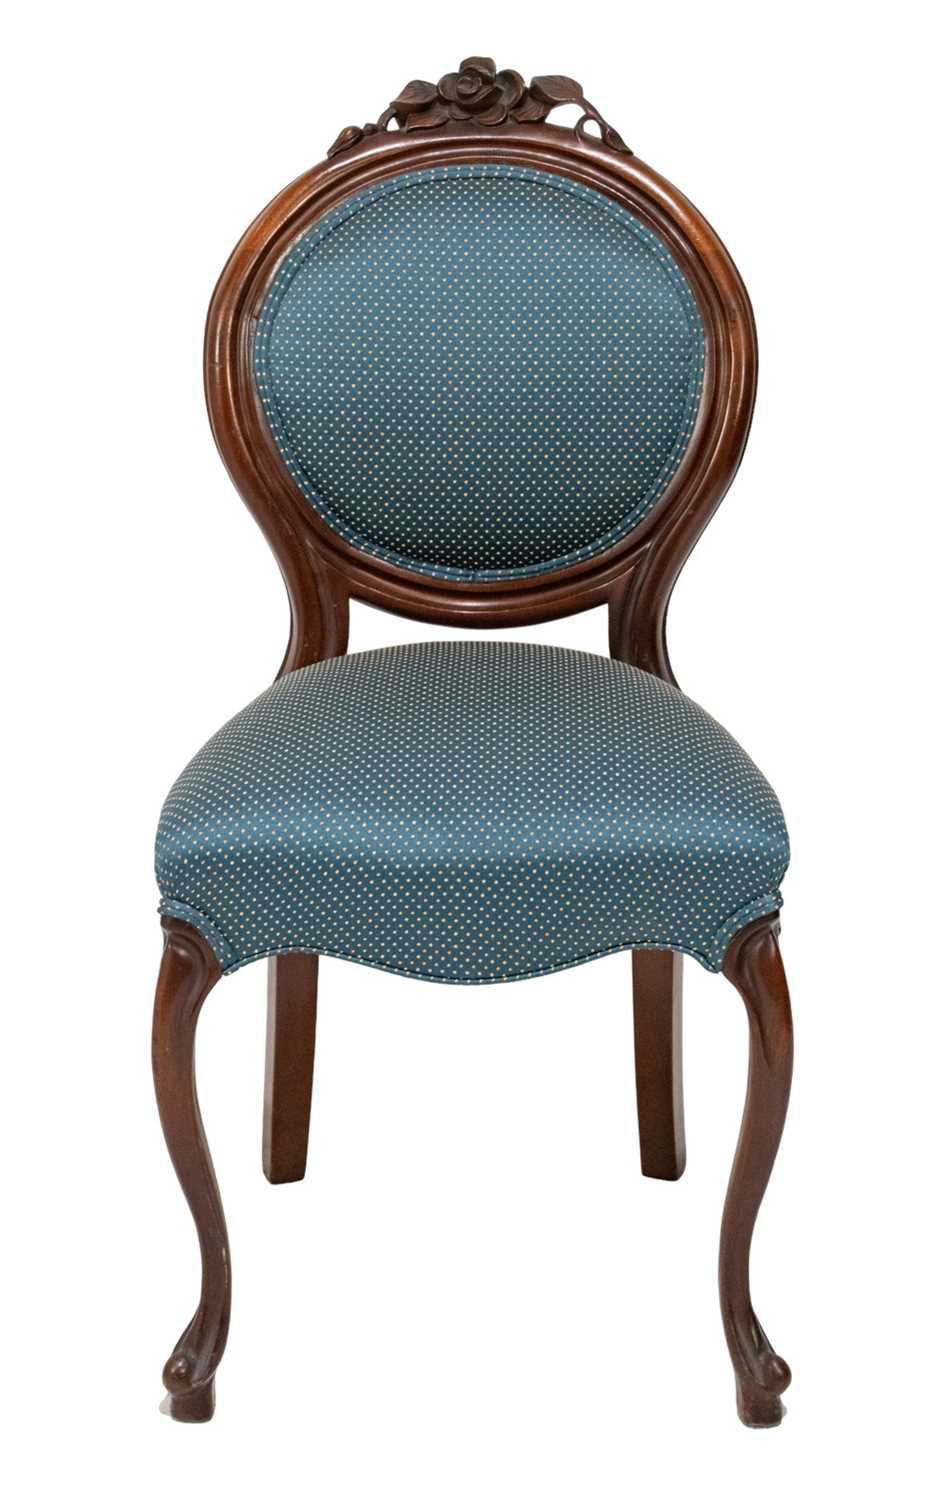 Mahogany Upholstered Side Chair